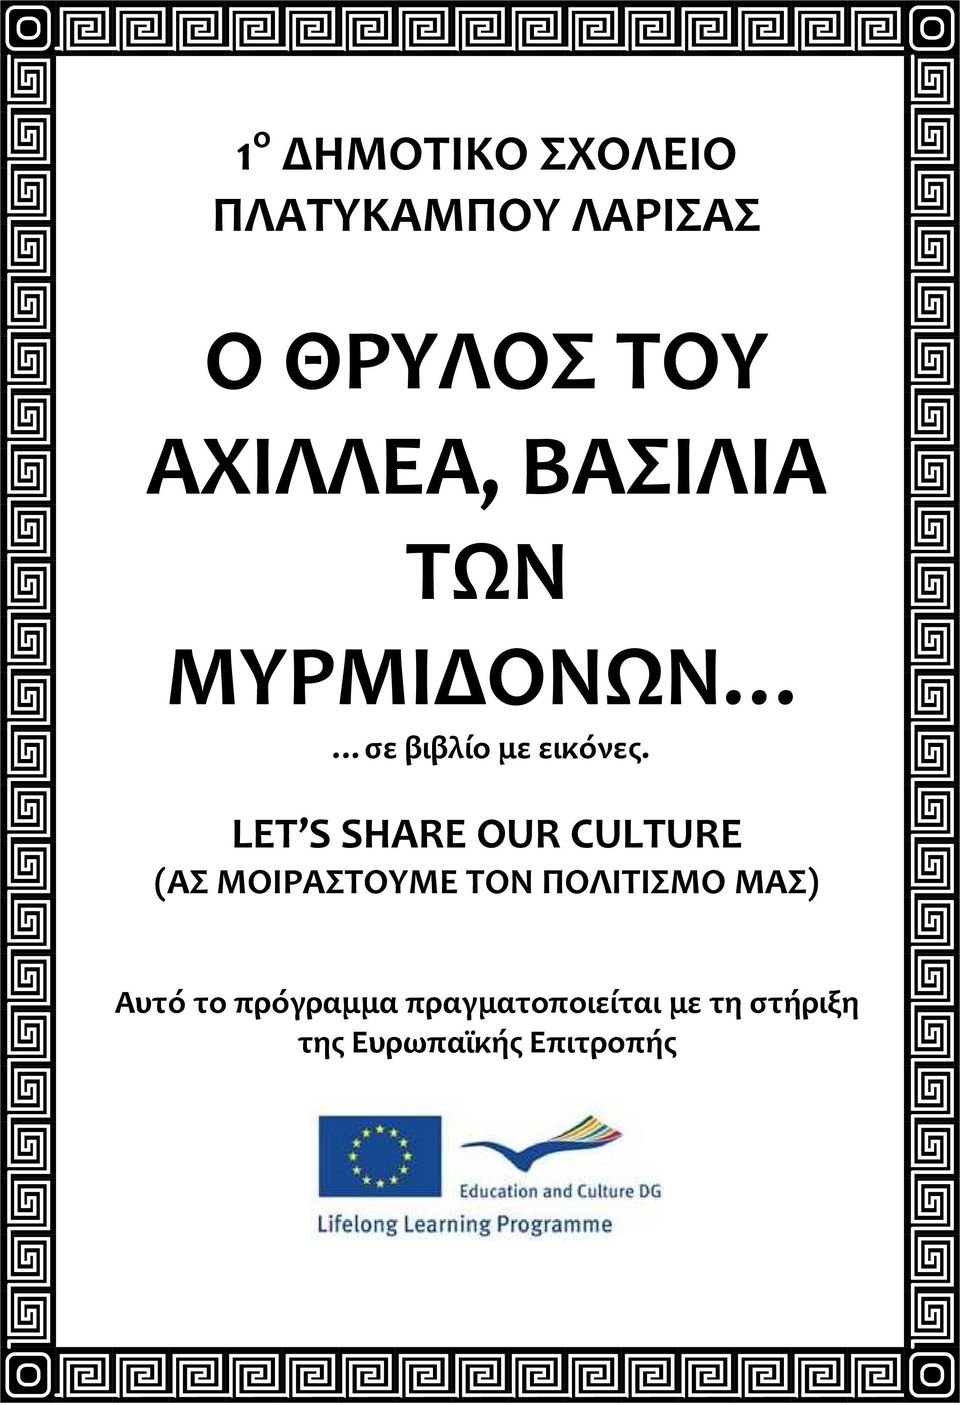 LET S SHARE OUR CULTURE (ΑΣ ΜΟΙΡΑΣΤΟΥΜΕ ΤΟΝ ΠΟΛΙΤΙΣΜΟ ΜΑΣ)